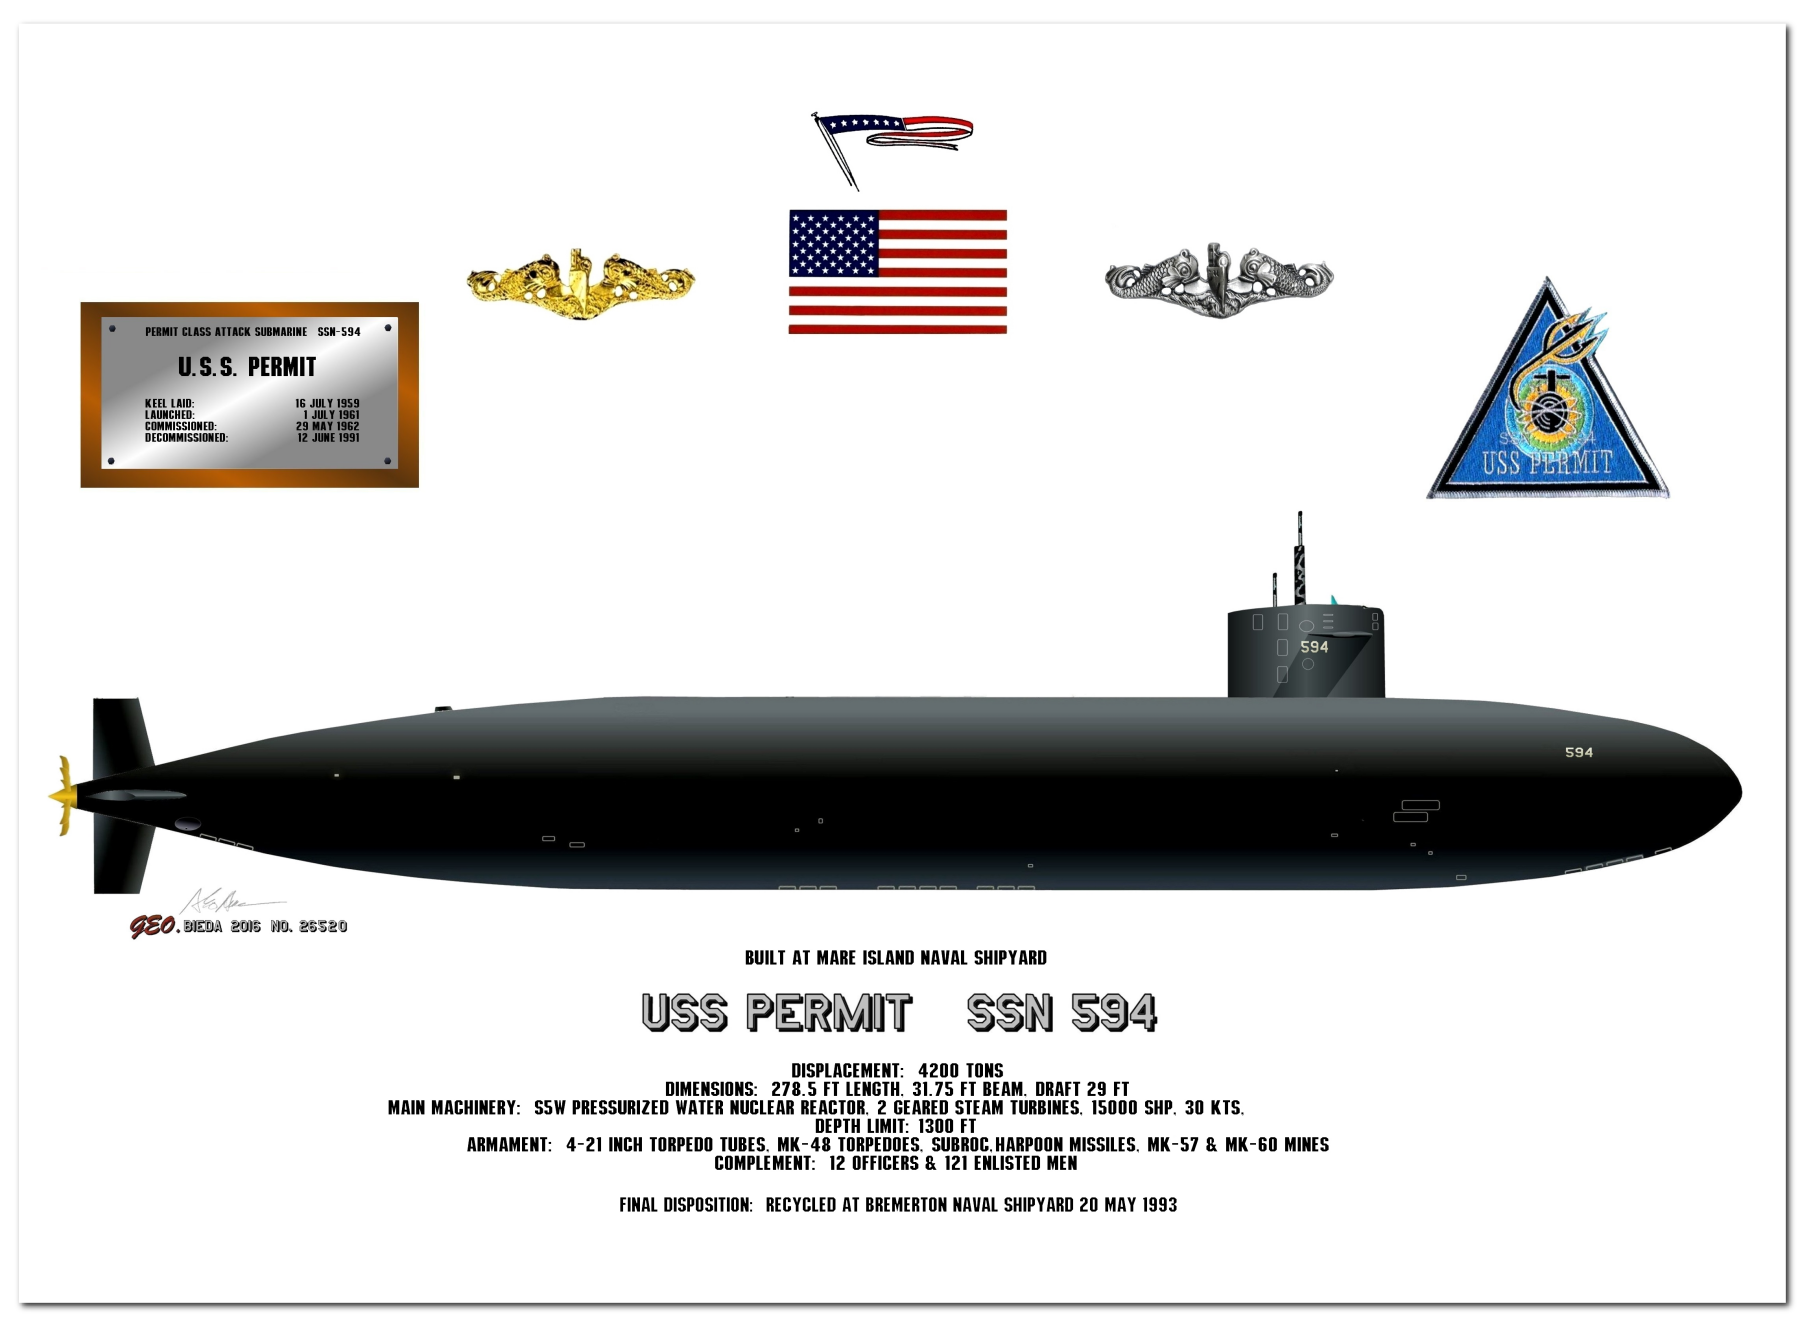 Permit Class Nuclear Fast Attack Submarines